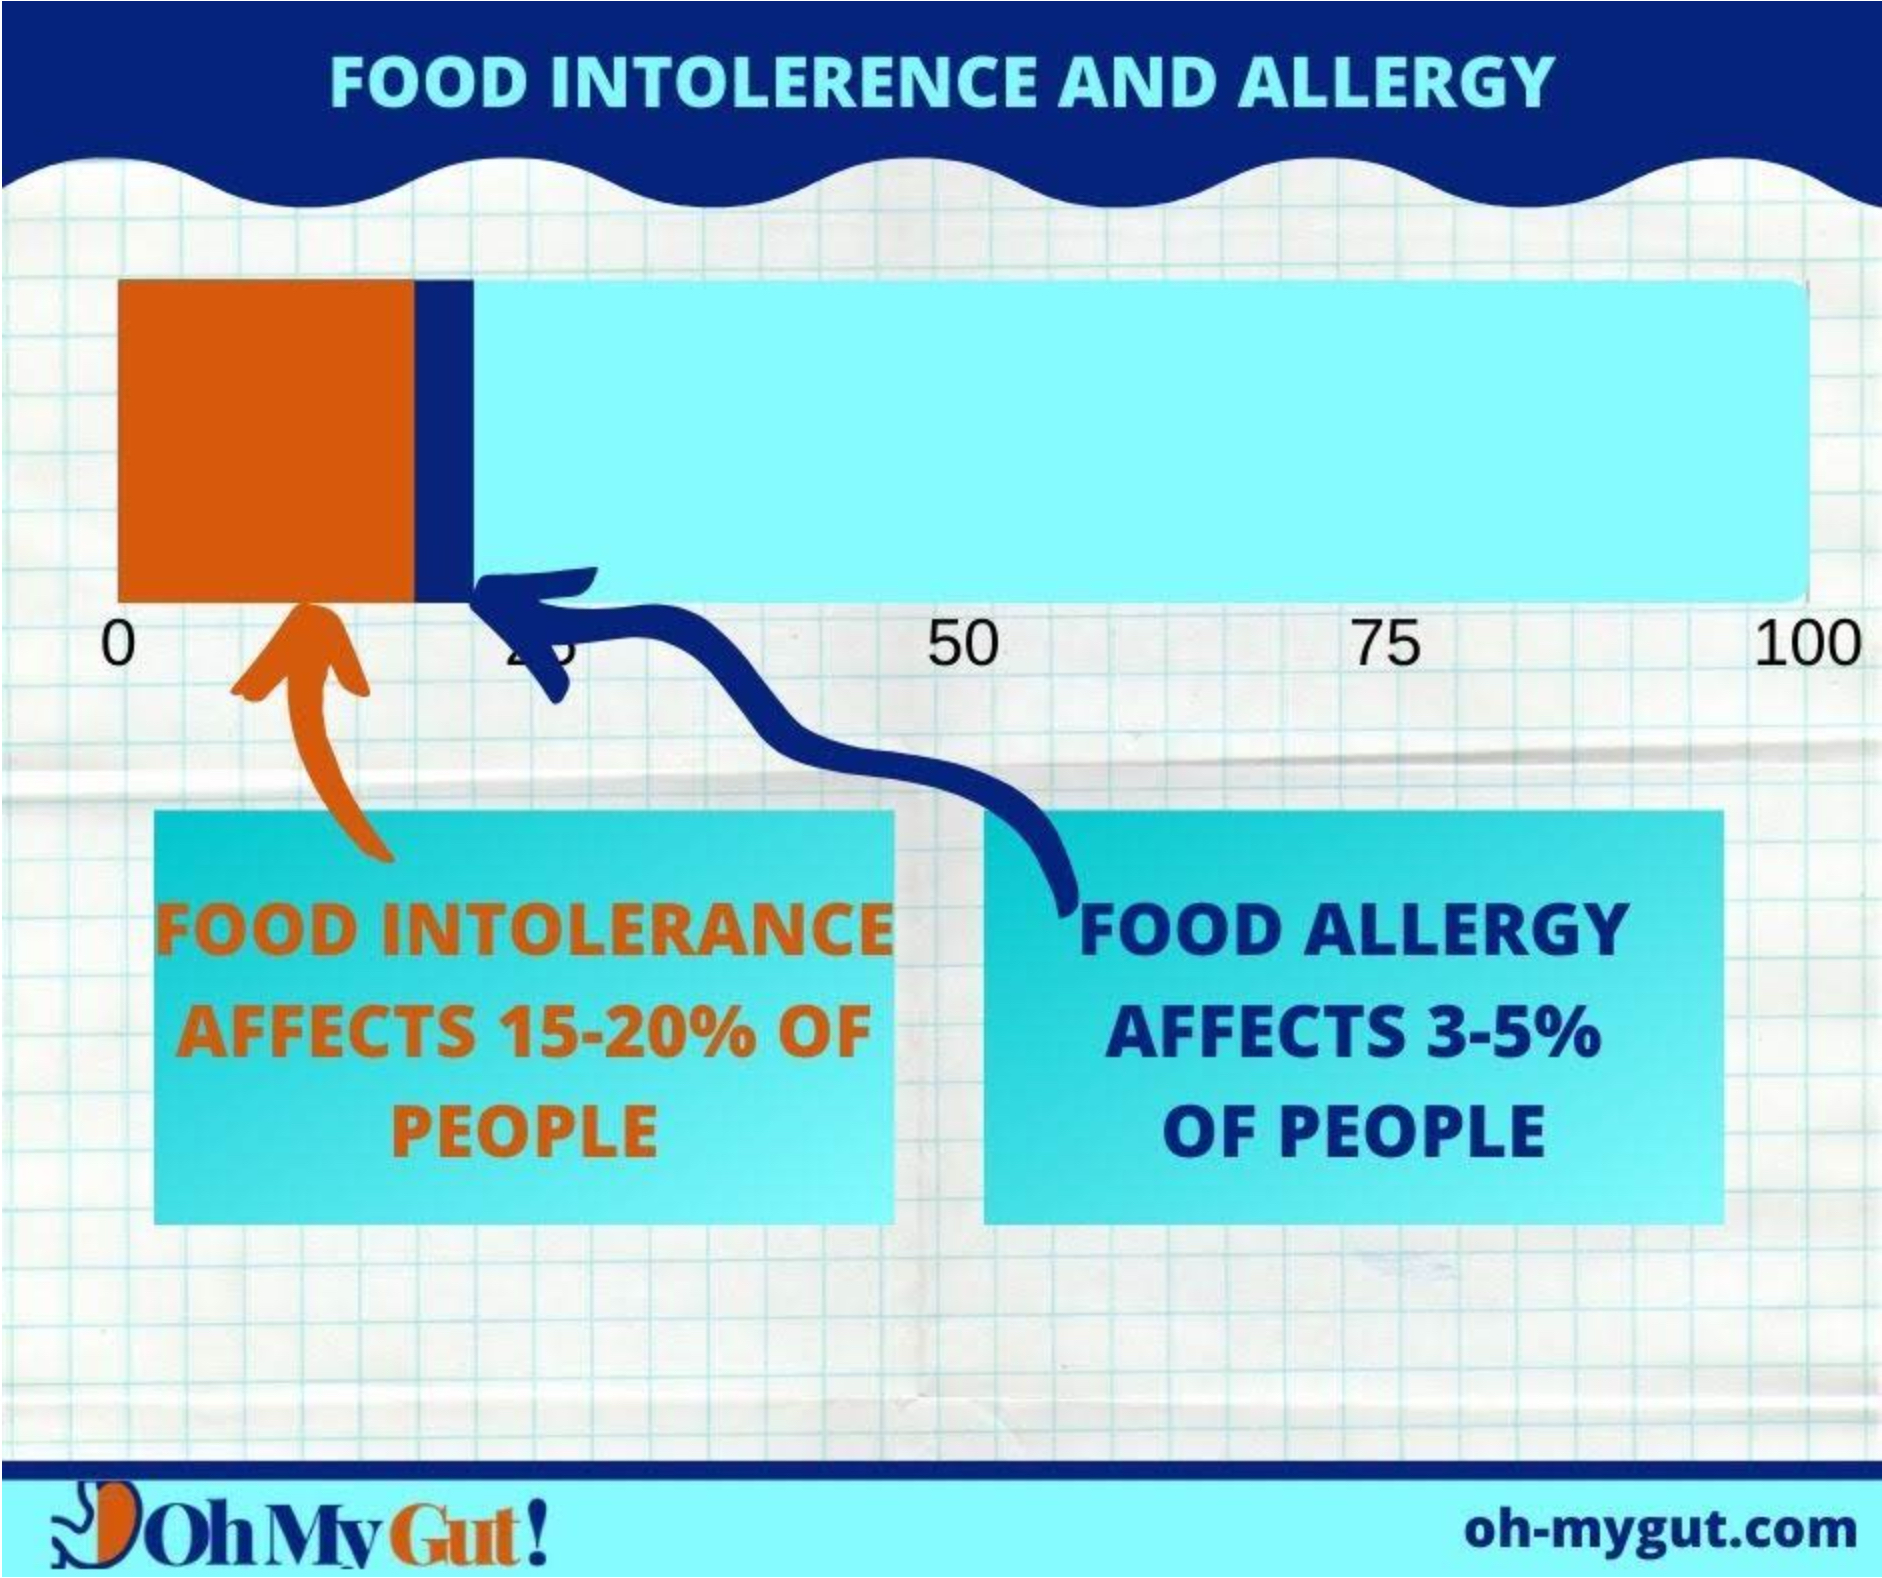 Prevalence of food intolerance and food allergy infographic.